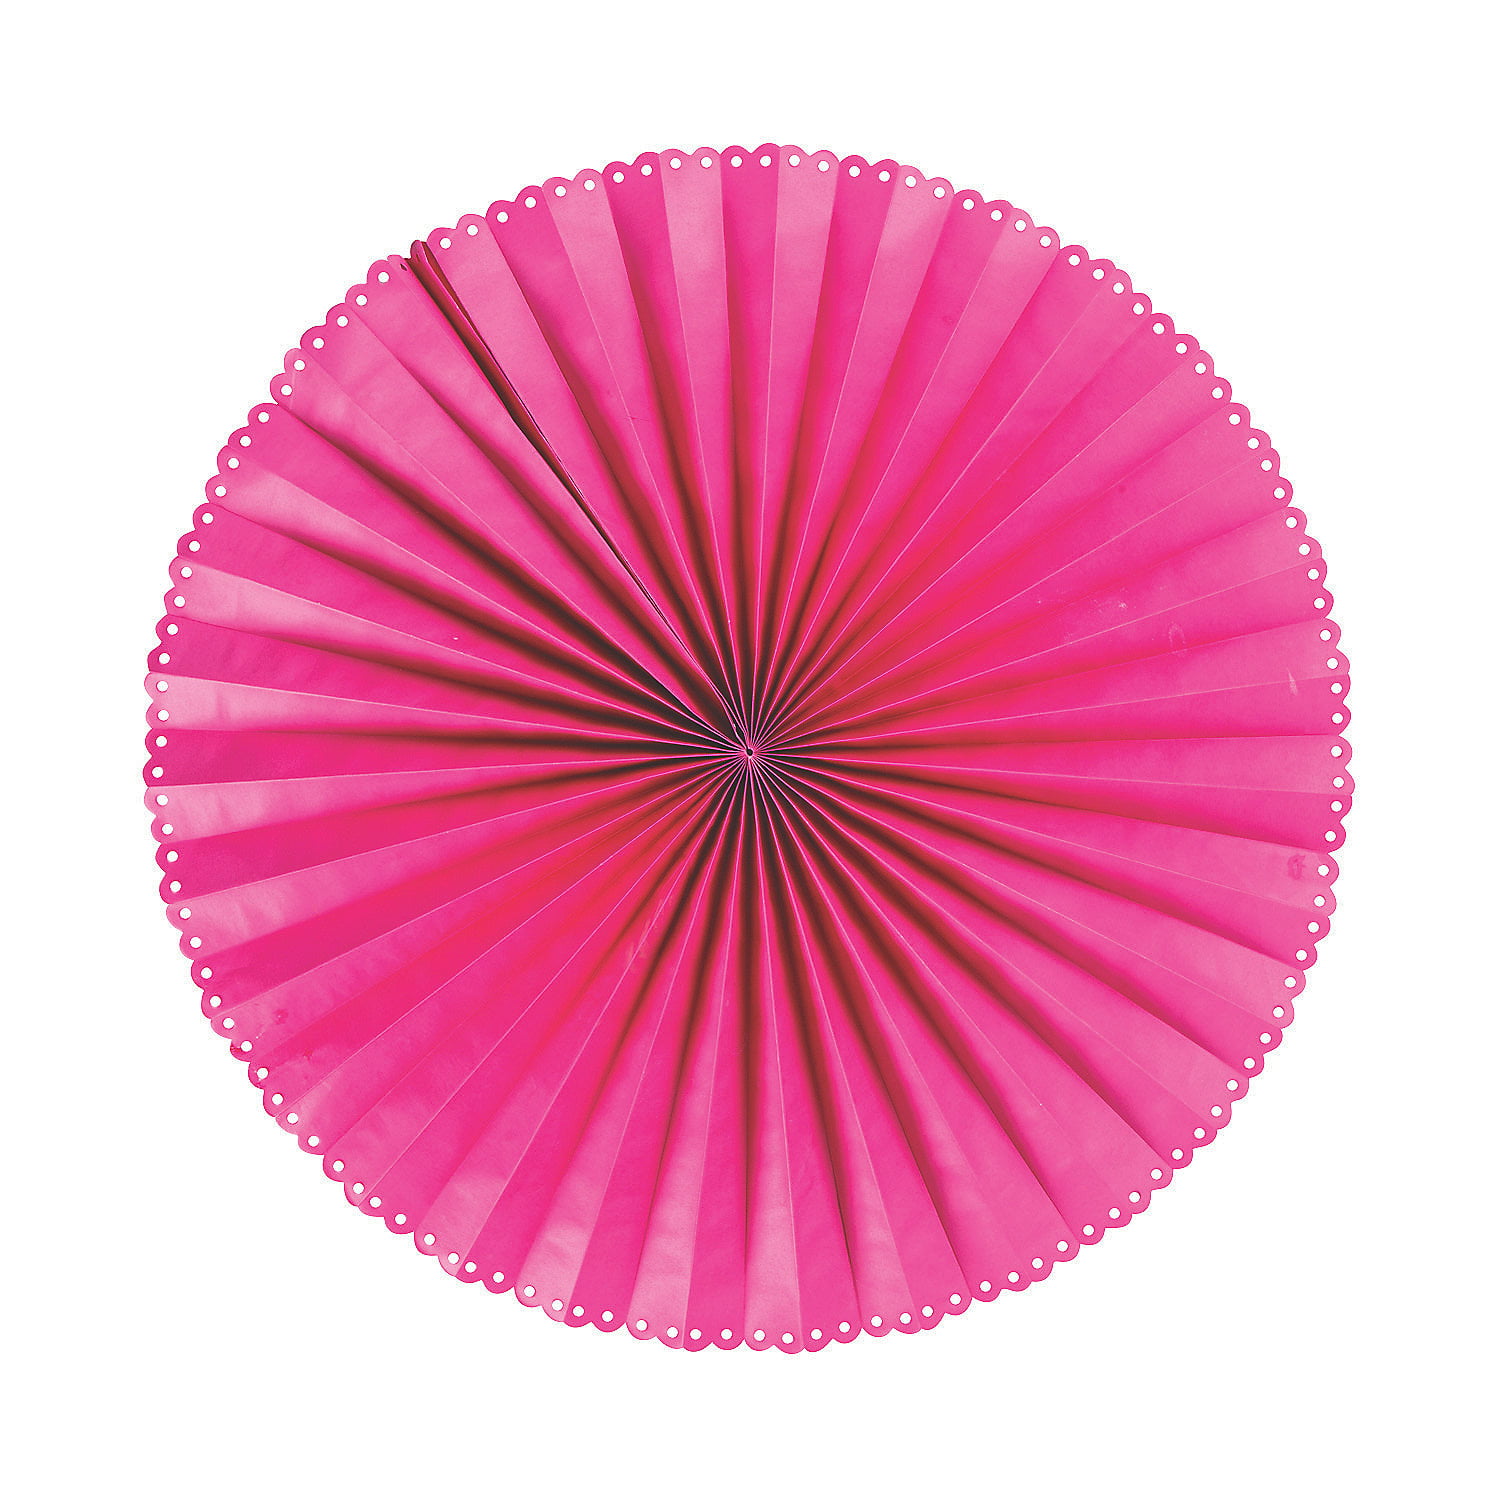 Set of 8 Vibrant Paper Fans for Eye-catching Party Decorations Pink, Blue  and Mint -  Denmark